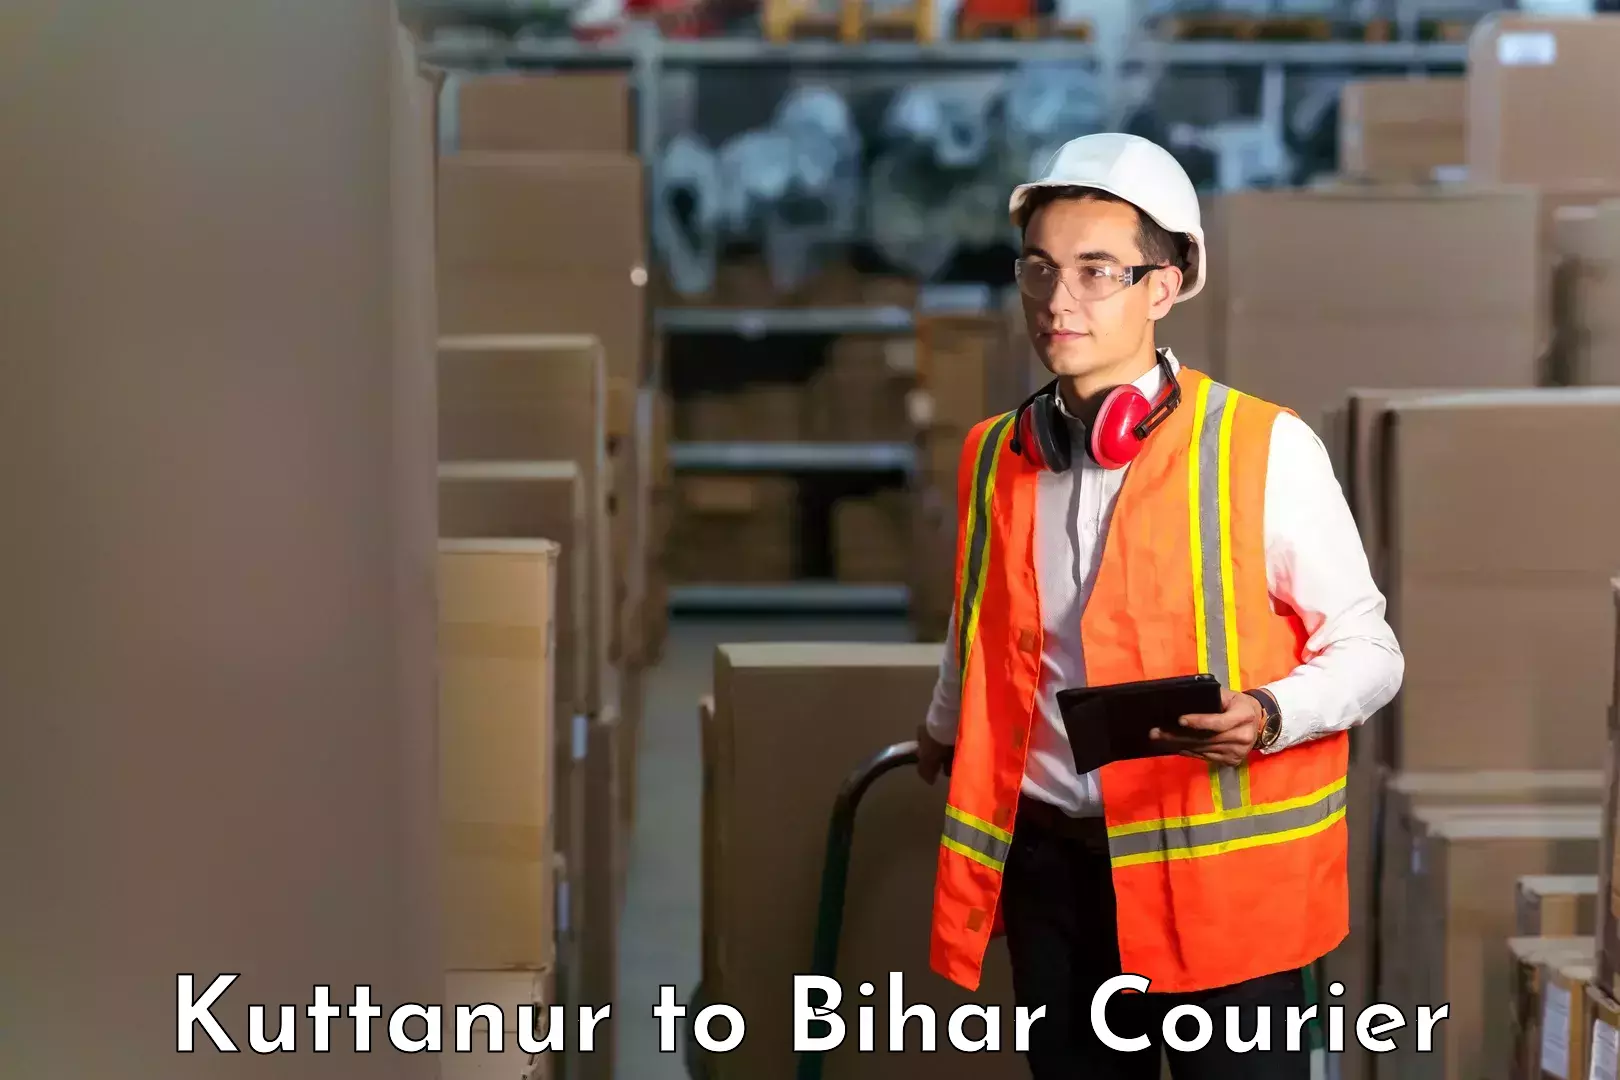 On-call courier service Kuttanur to Kochas